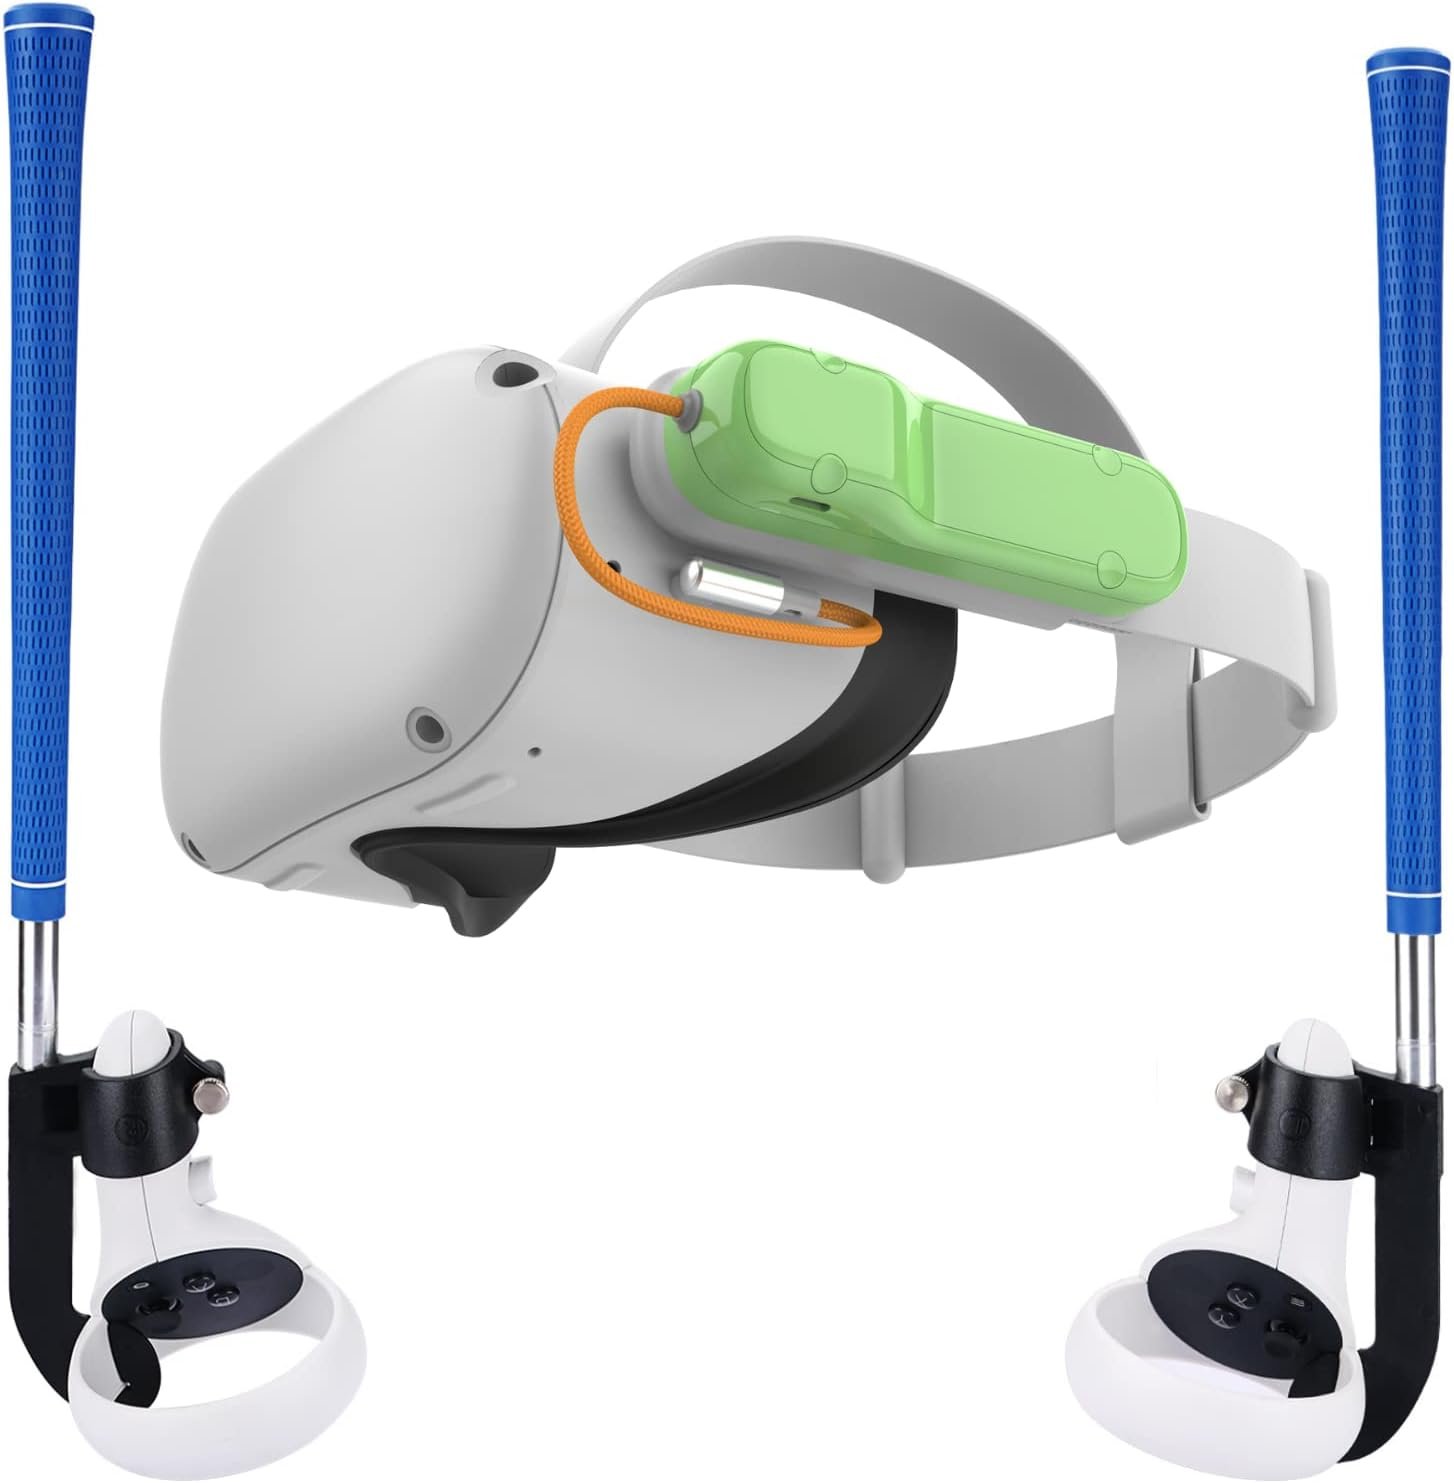 VR Golf Games Accessories for A Atandard Round Golf Club and Battery Pack for Oculus Quest 2